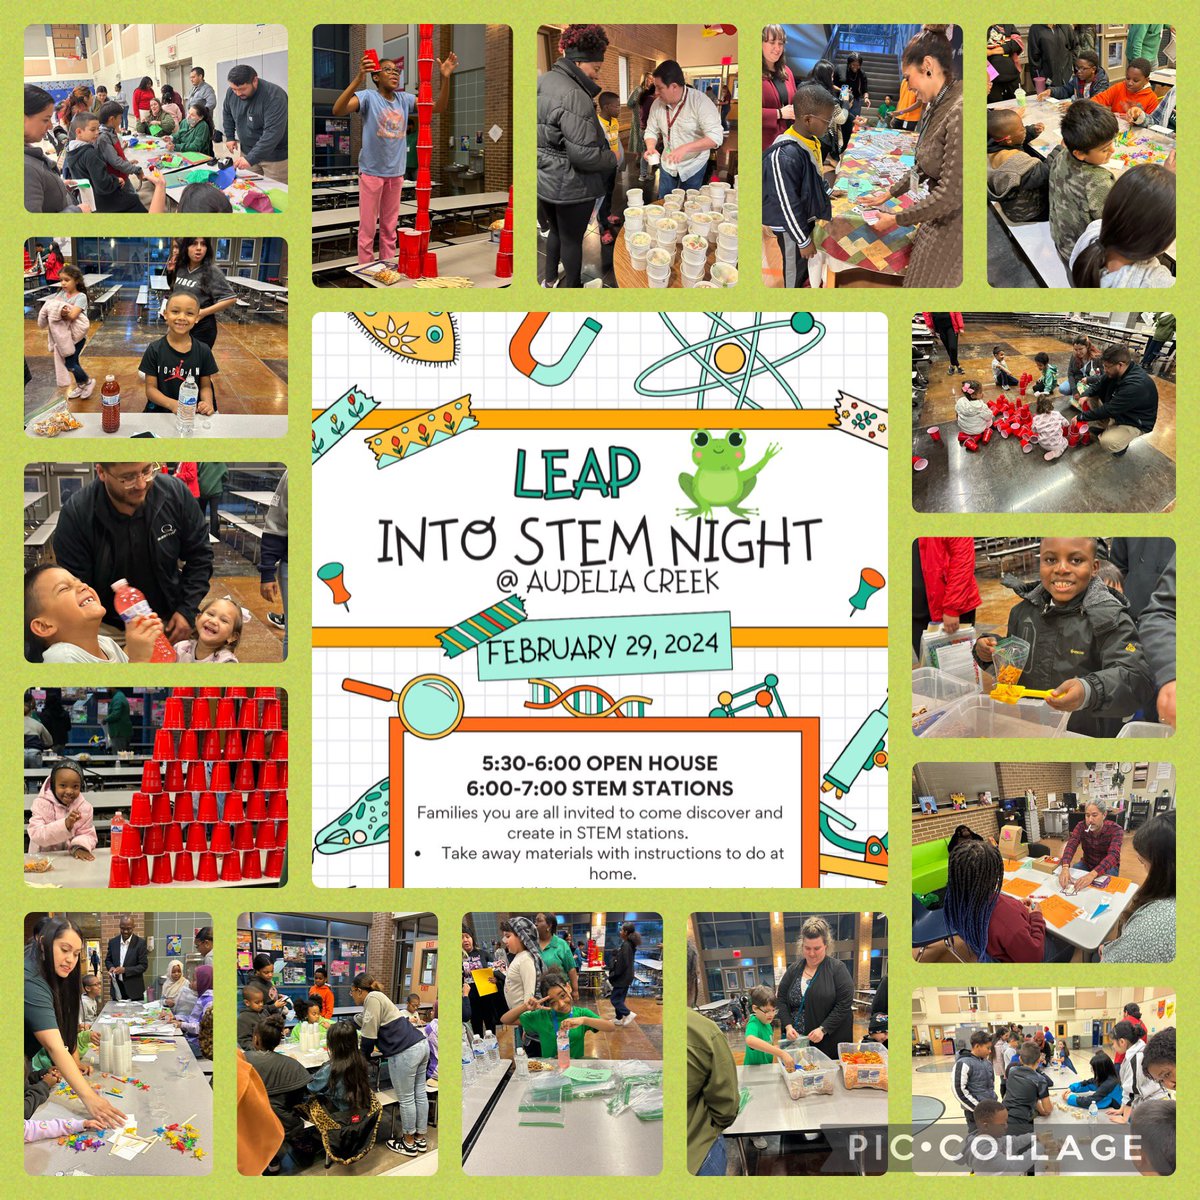 Open House and STEM Night @AudeliaCreek was a success!!! We had a great STEM team led by @AutumnUrton @MsGasparm and more who put all the fun activities together! We also want to thank @Chiloso_mexican for donating meals for our families and staff! #HustleandHeart #RISDWeAreOne